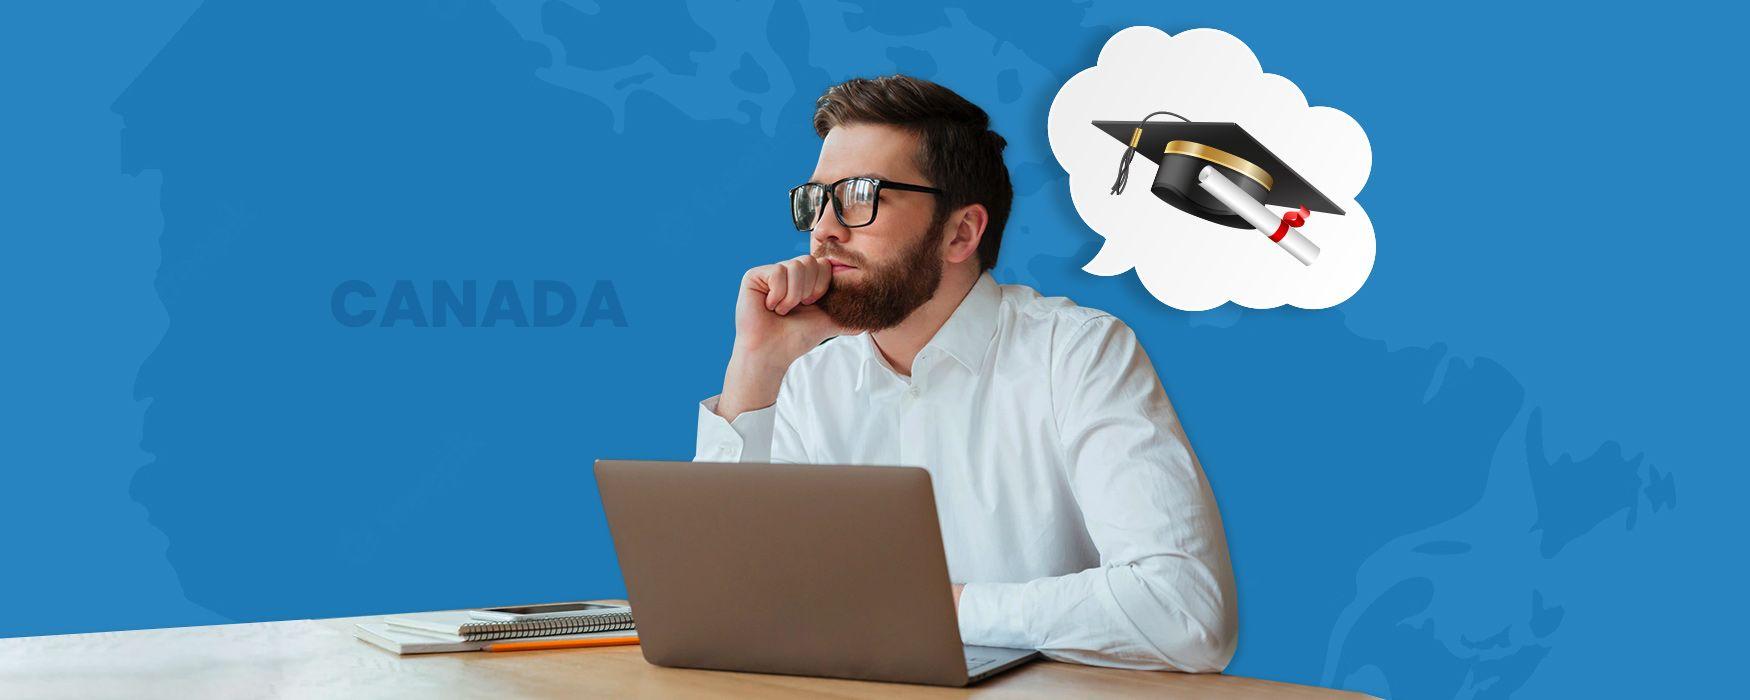 phd in business in canada